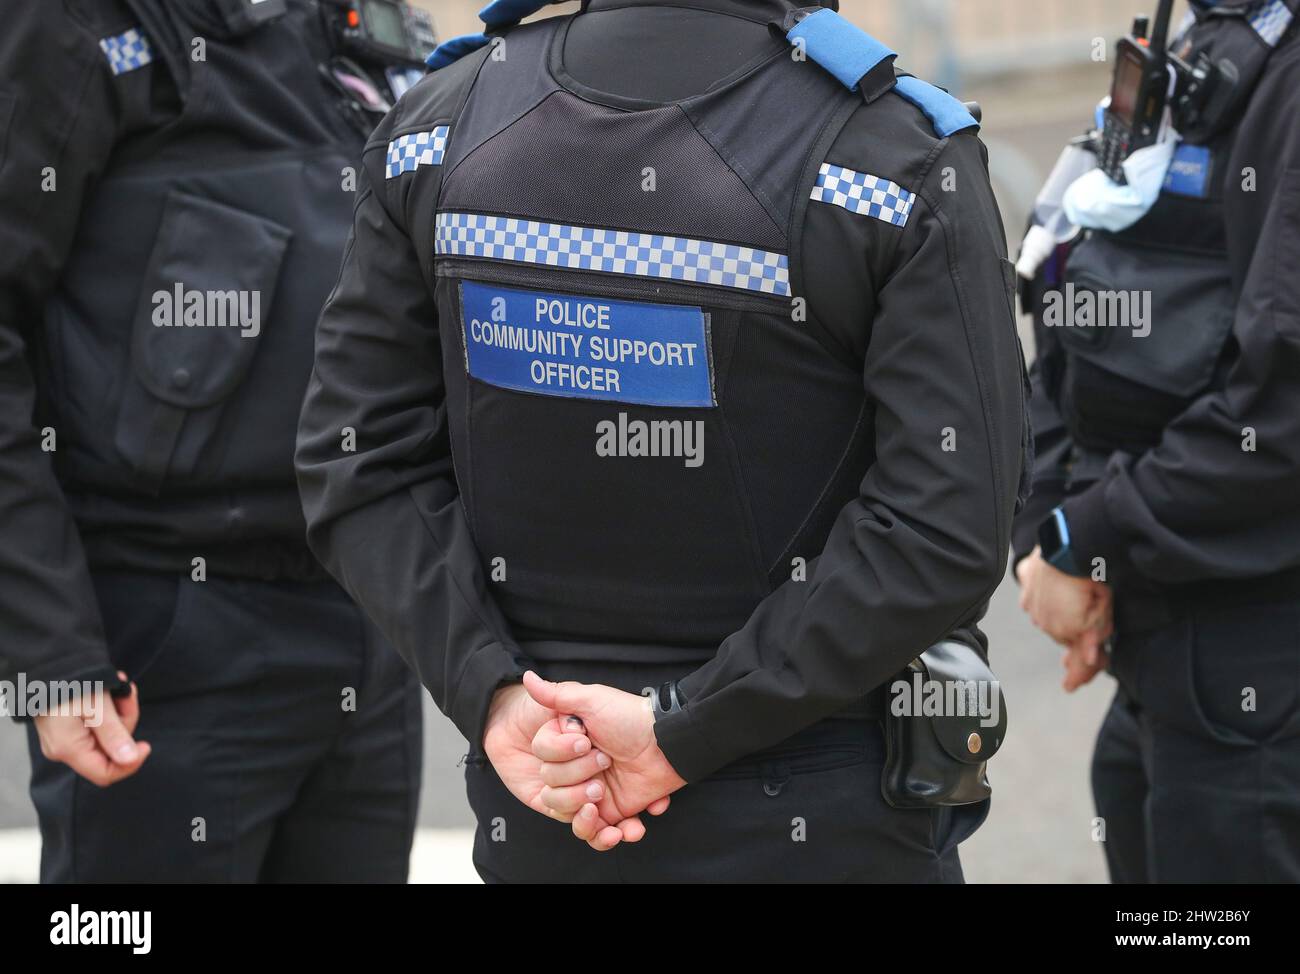 PCSO Police community support officer on duty in Hampshire UK, pictured from behind. Stock Photo